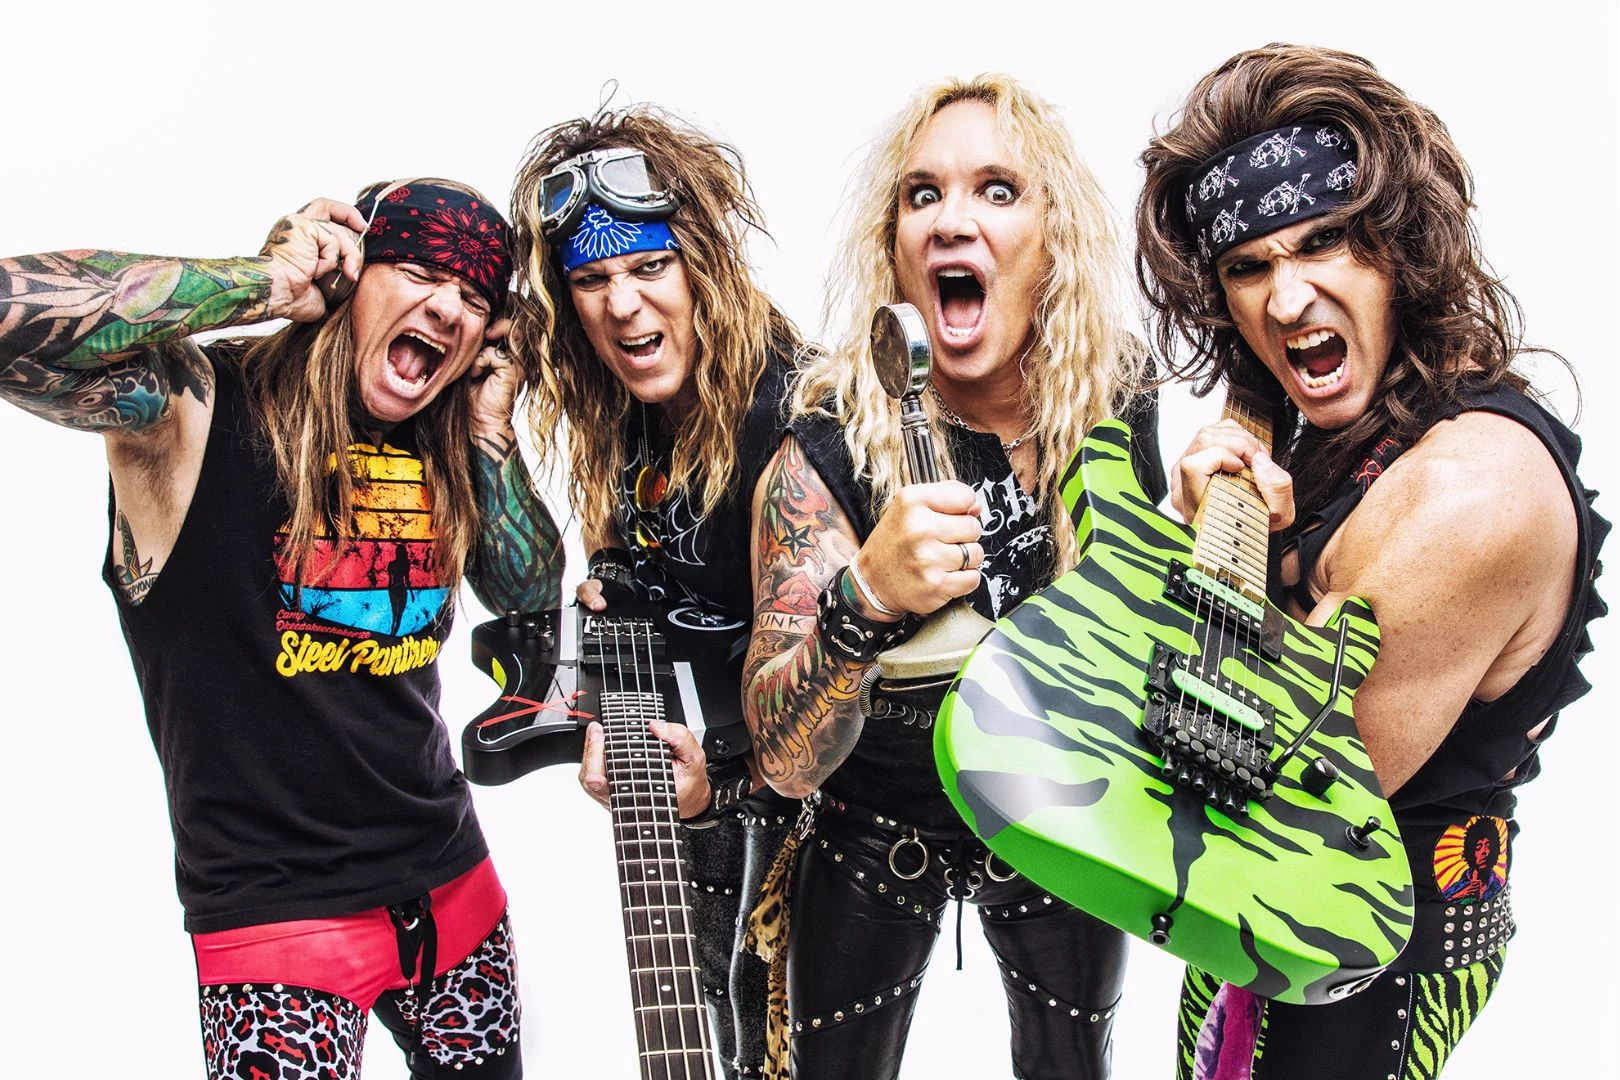 Steel Panther 1987 Video Is Ultimate 80s Tribute, Except For.. picture